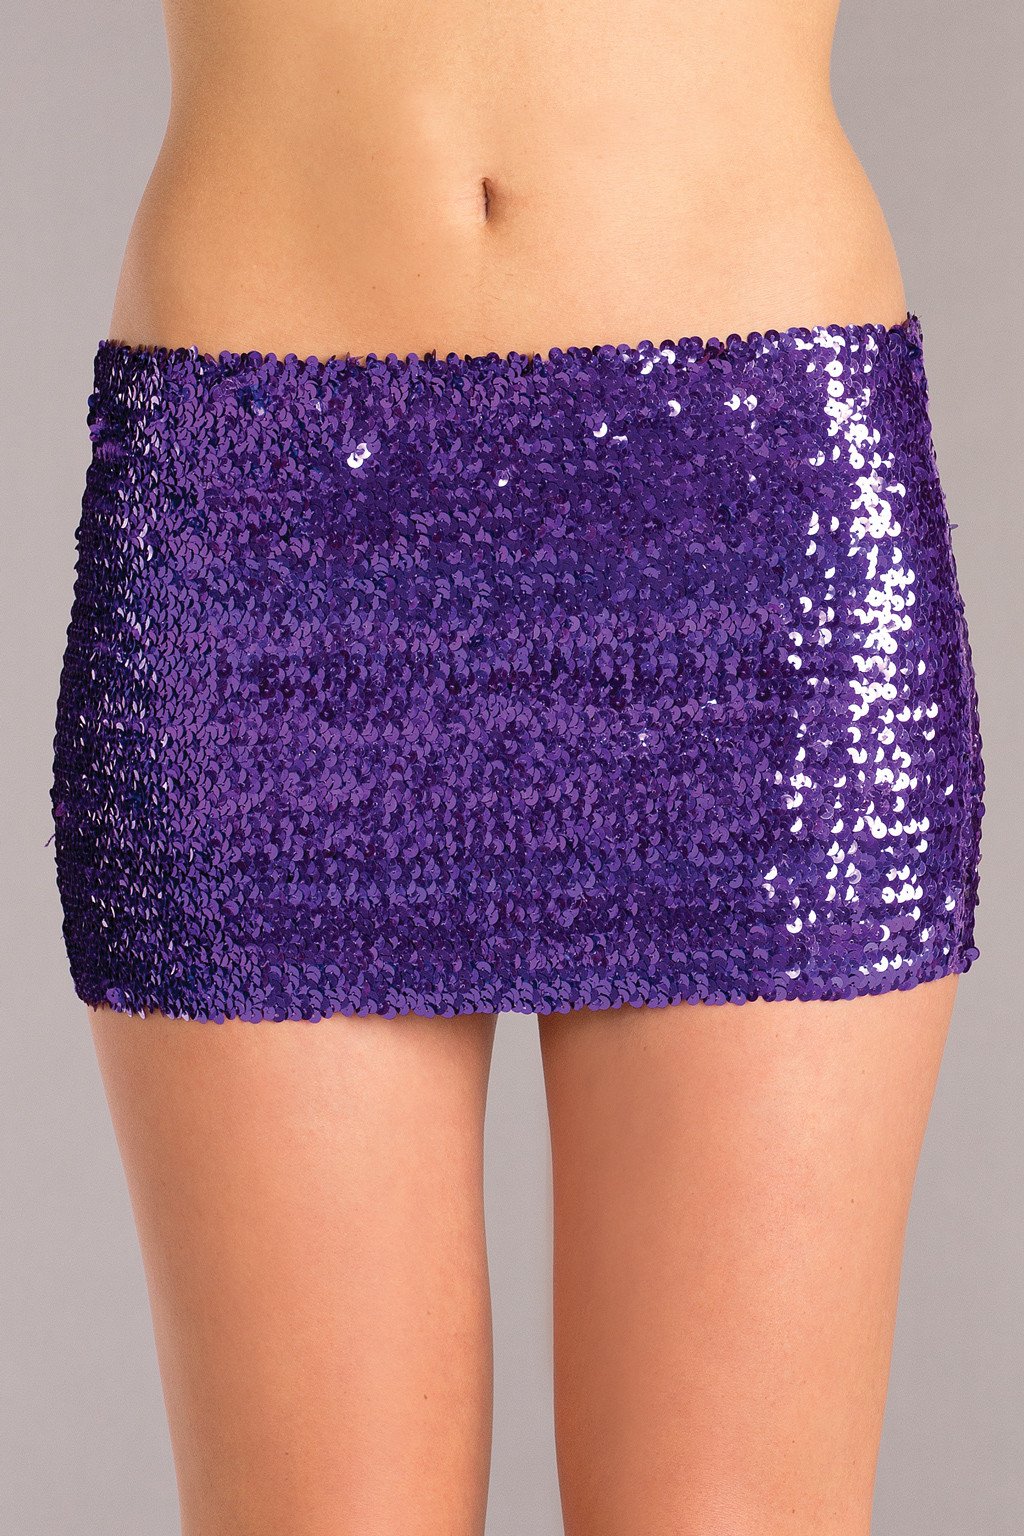 (WD) PURPLE SEQUIN SKIRT SMALL